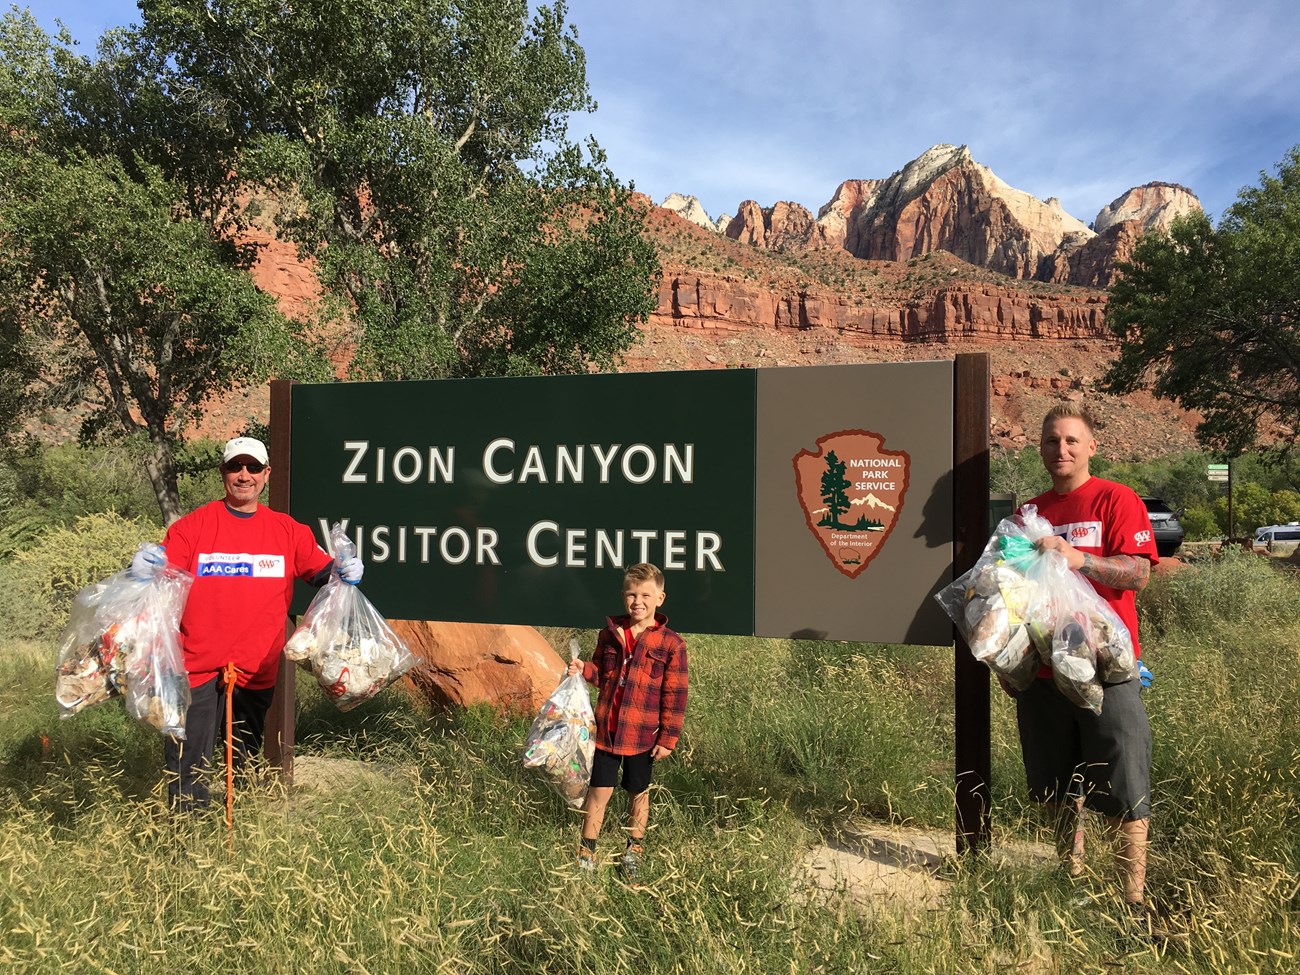 Three people hold bags of garbage they collected near the Zion Canyon Visitor Center